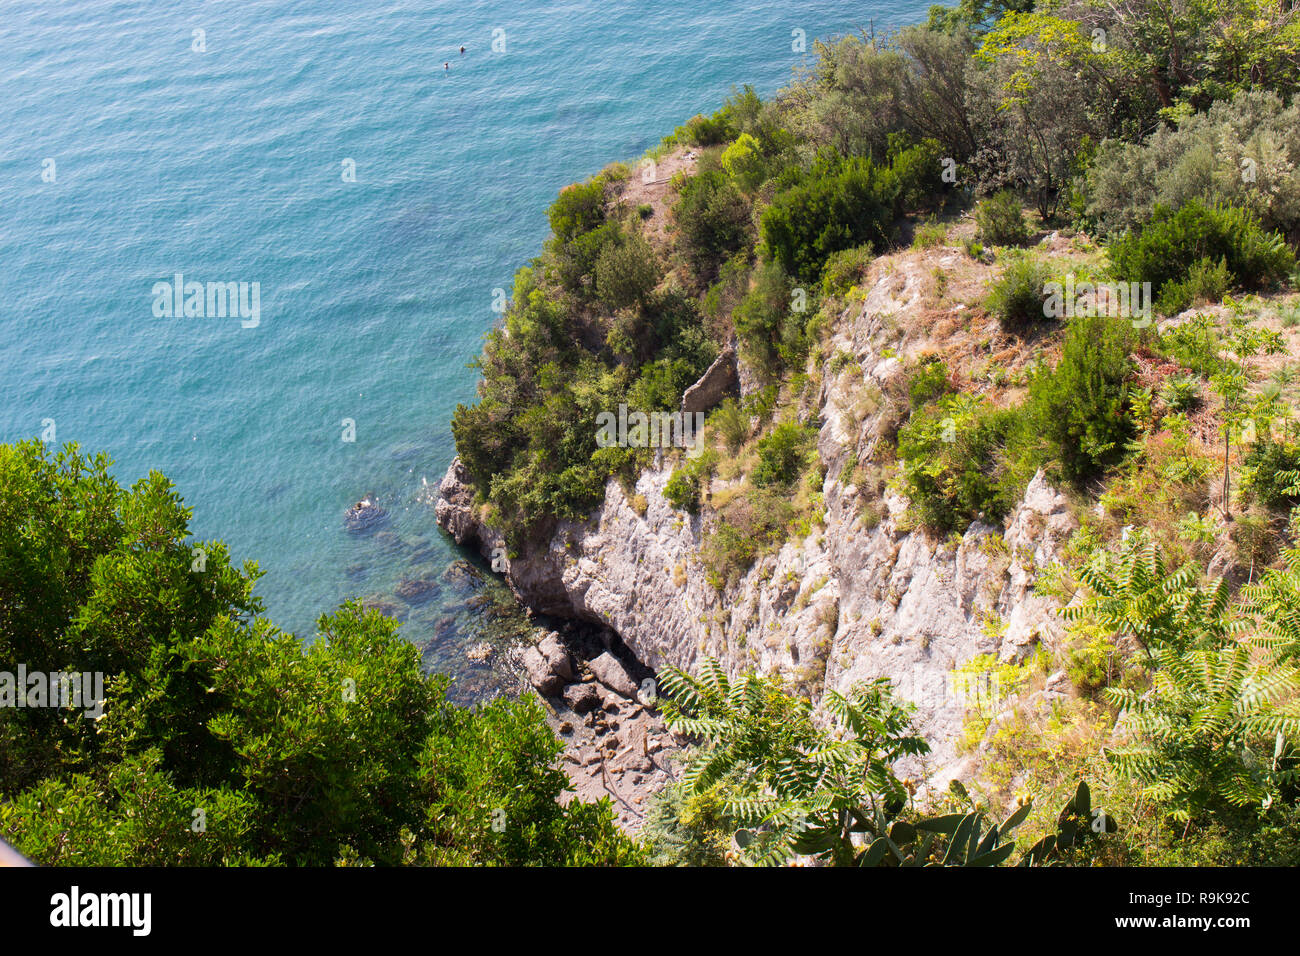 View from the promontory of the natural inlet, Vietri sul mare, Amalfi coast, Salerno, Italy Stock Photo